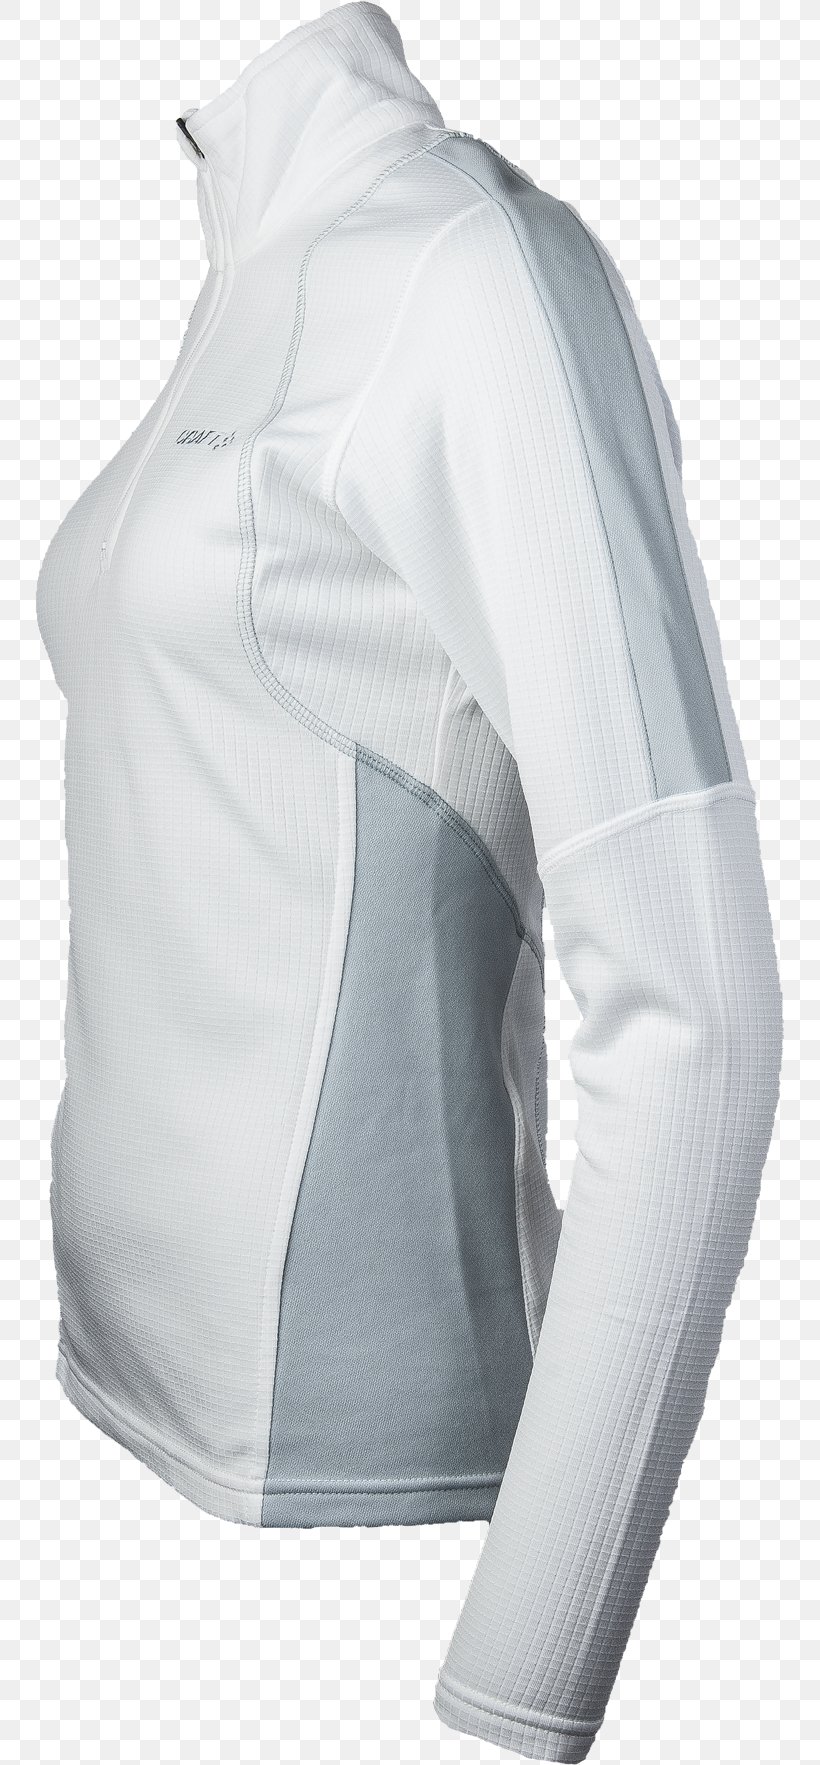 Sleeve Shoulder Jacket, PNG, 750x1765px, Sleeve, Jacket, Joint, Neck, Outerwear Download Free